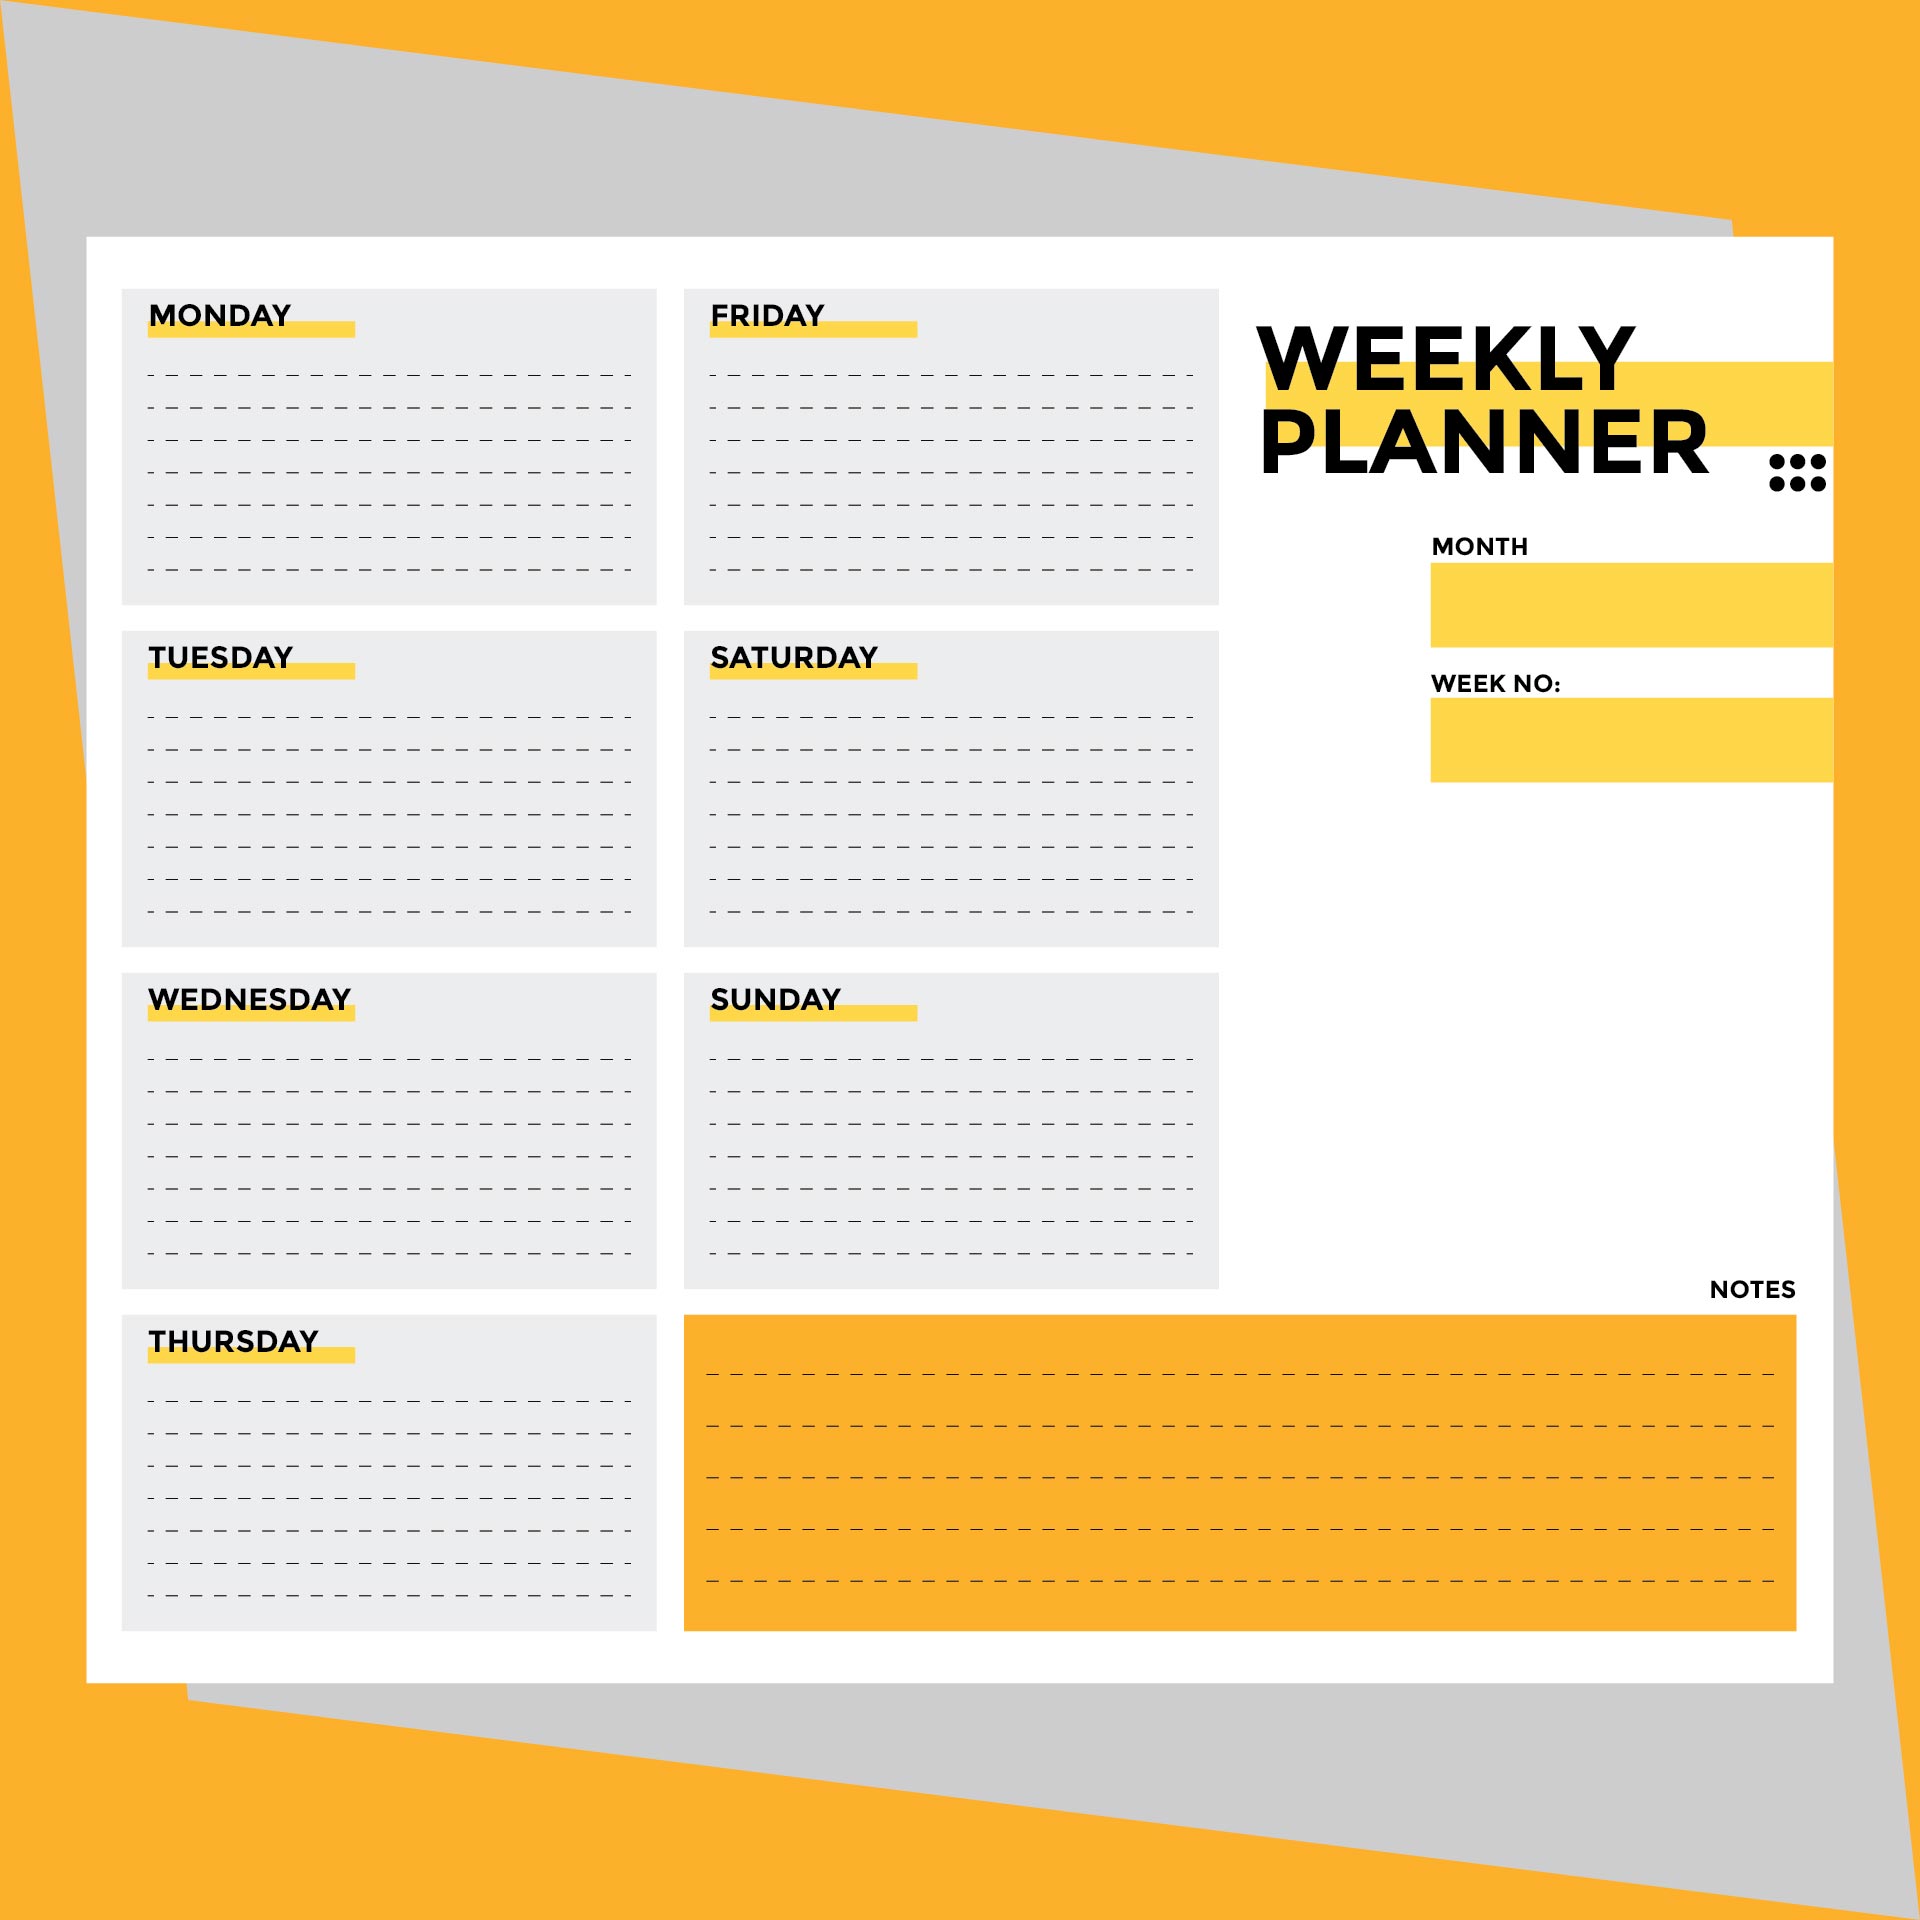 11-free-printable-planners-to-help-get-your-life-together